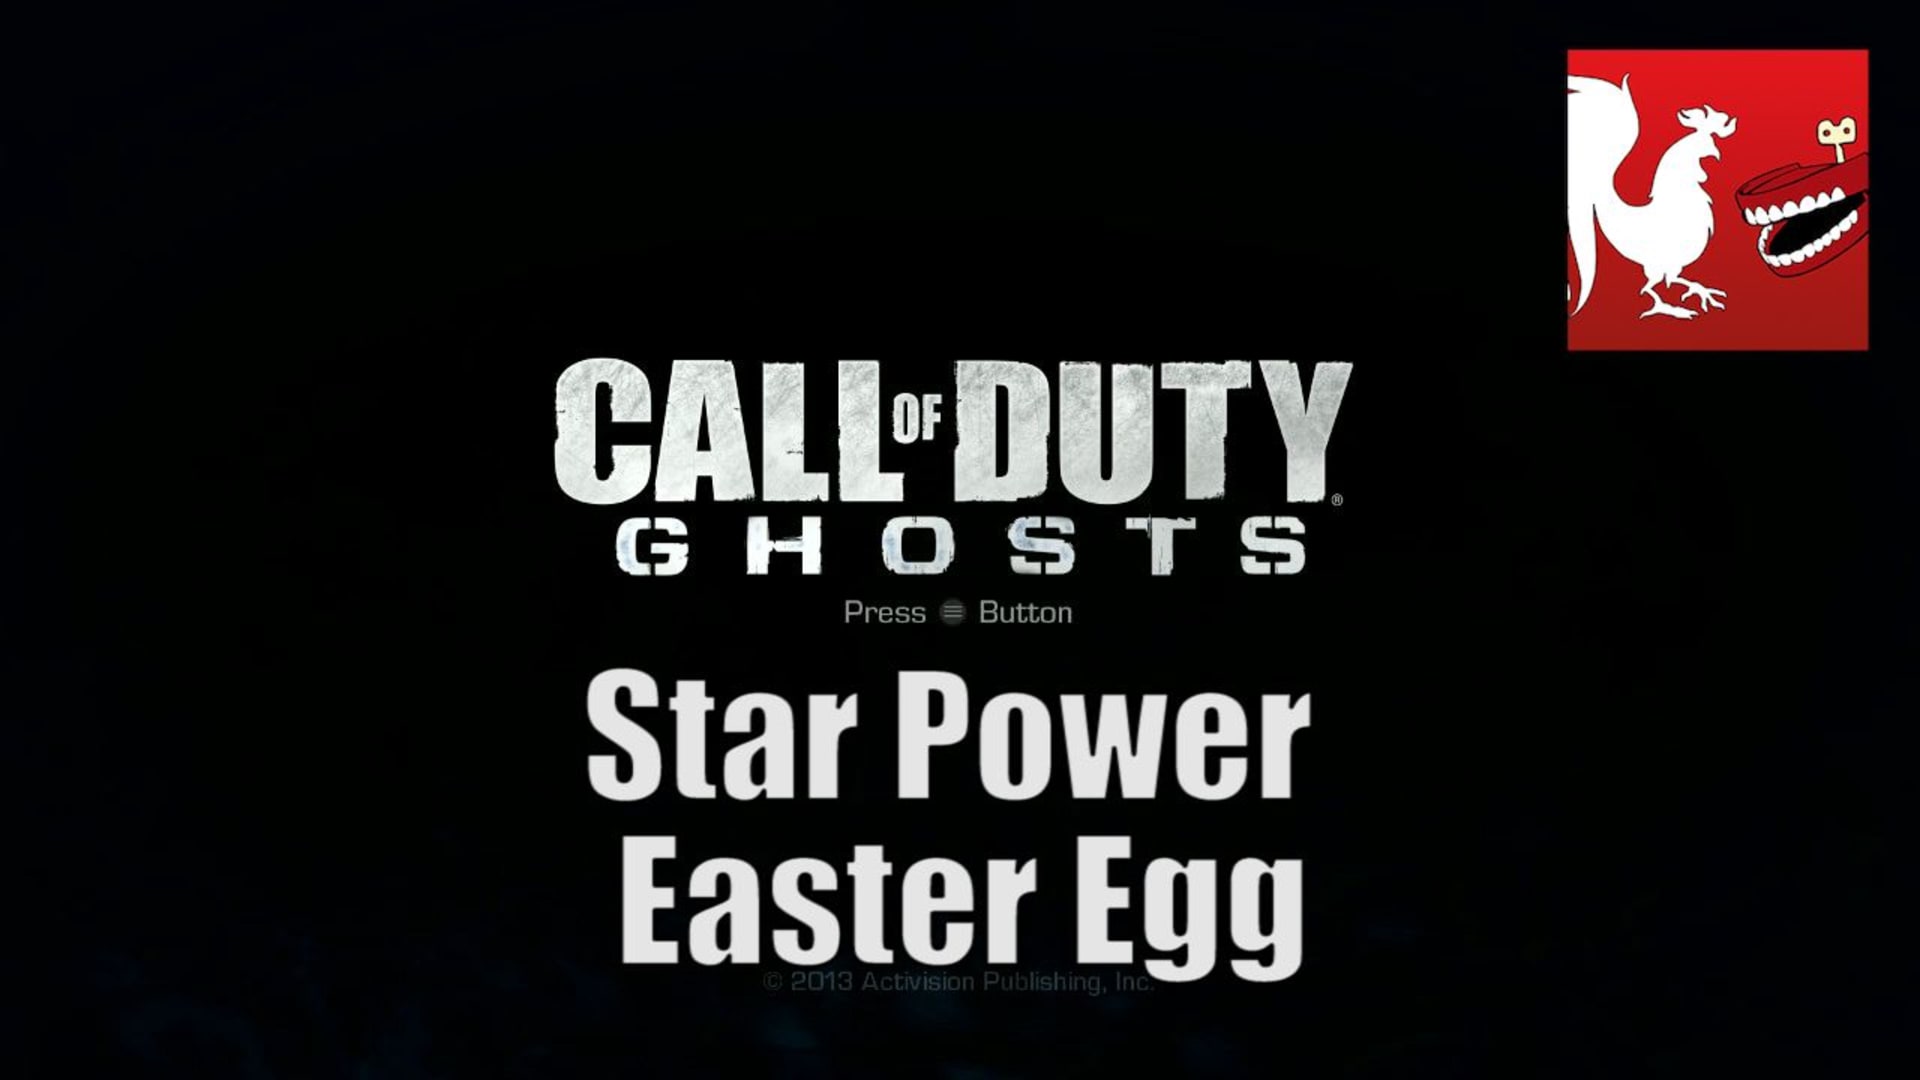 Call of Duty: Ghosts - Star Power Easter Egg - Rooster Teeth